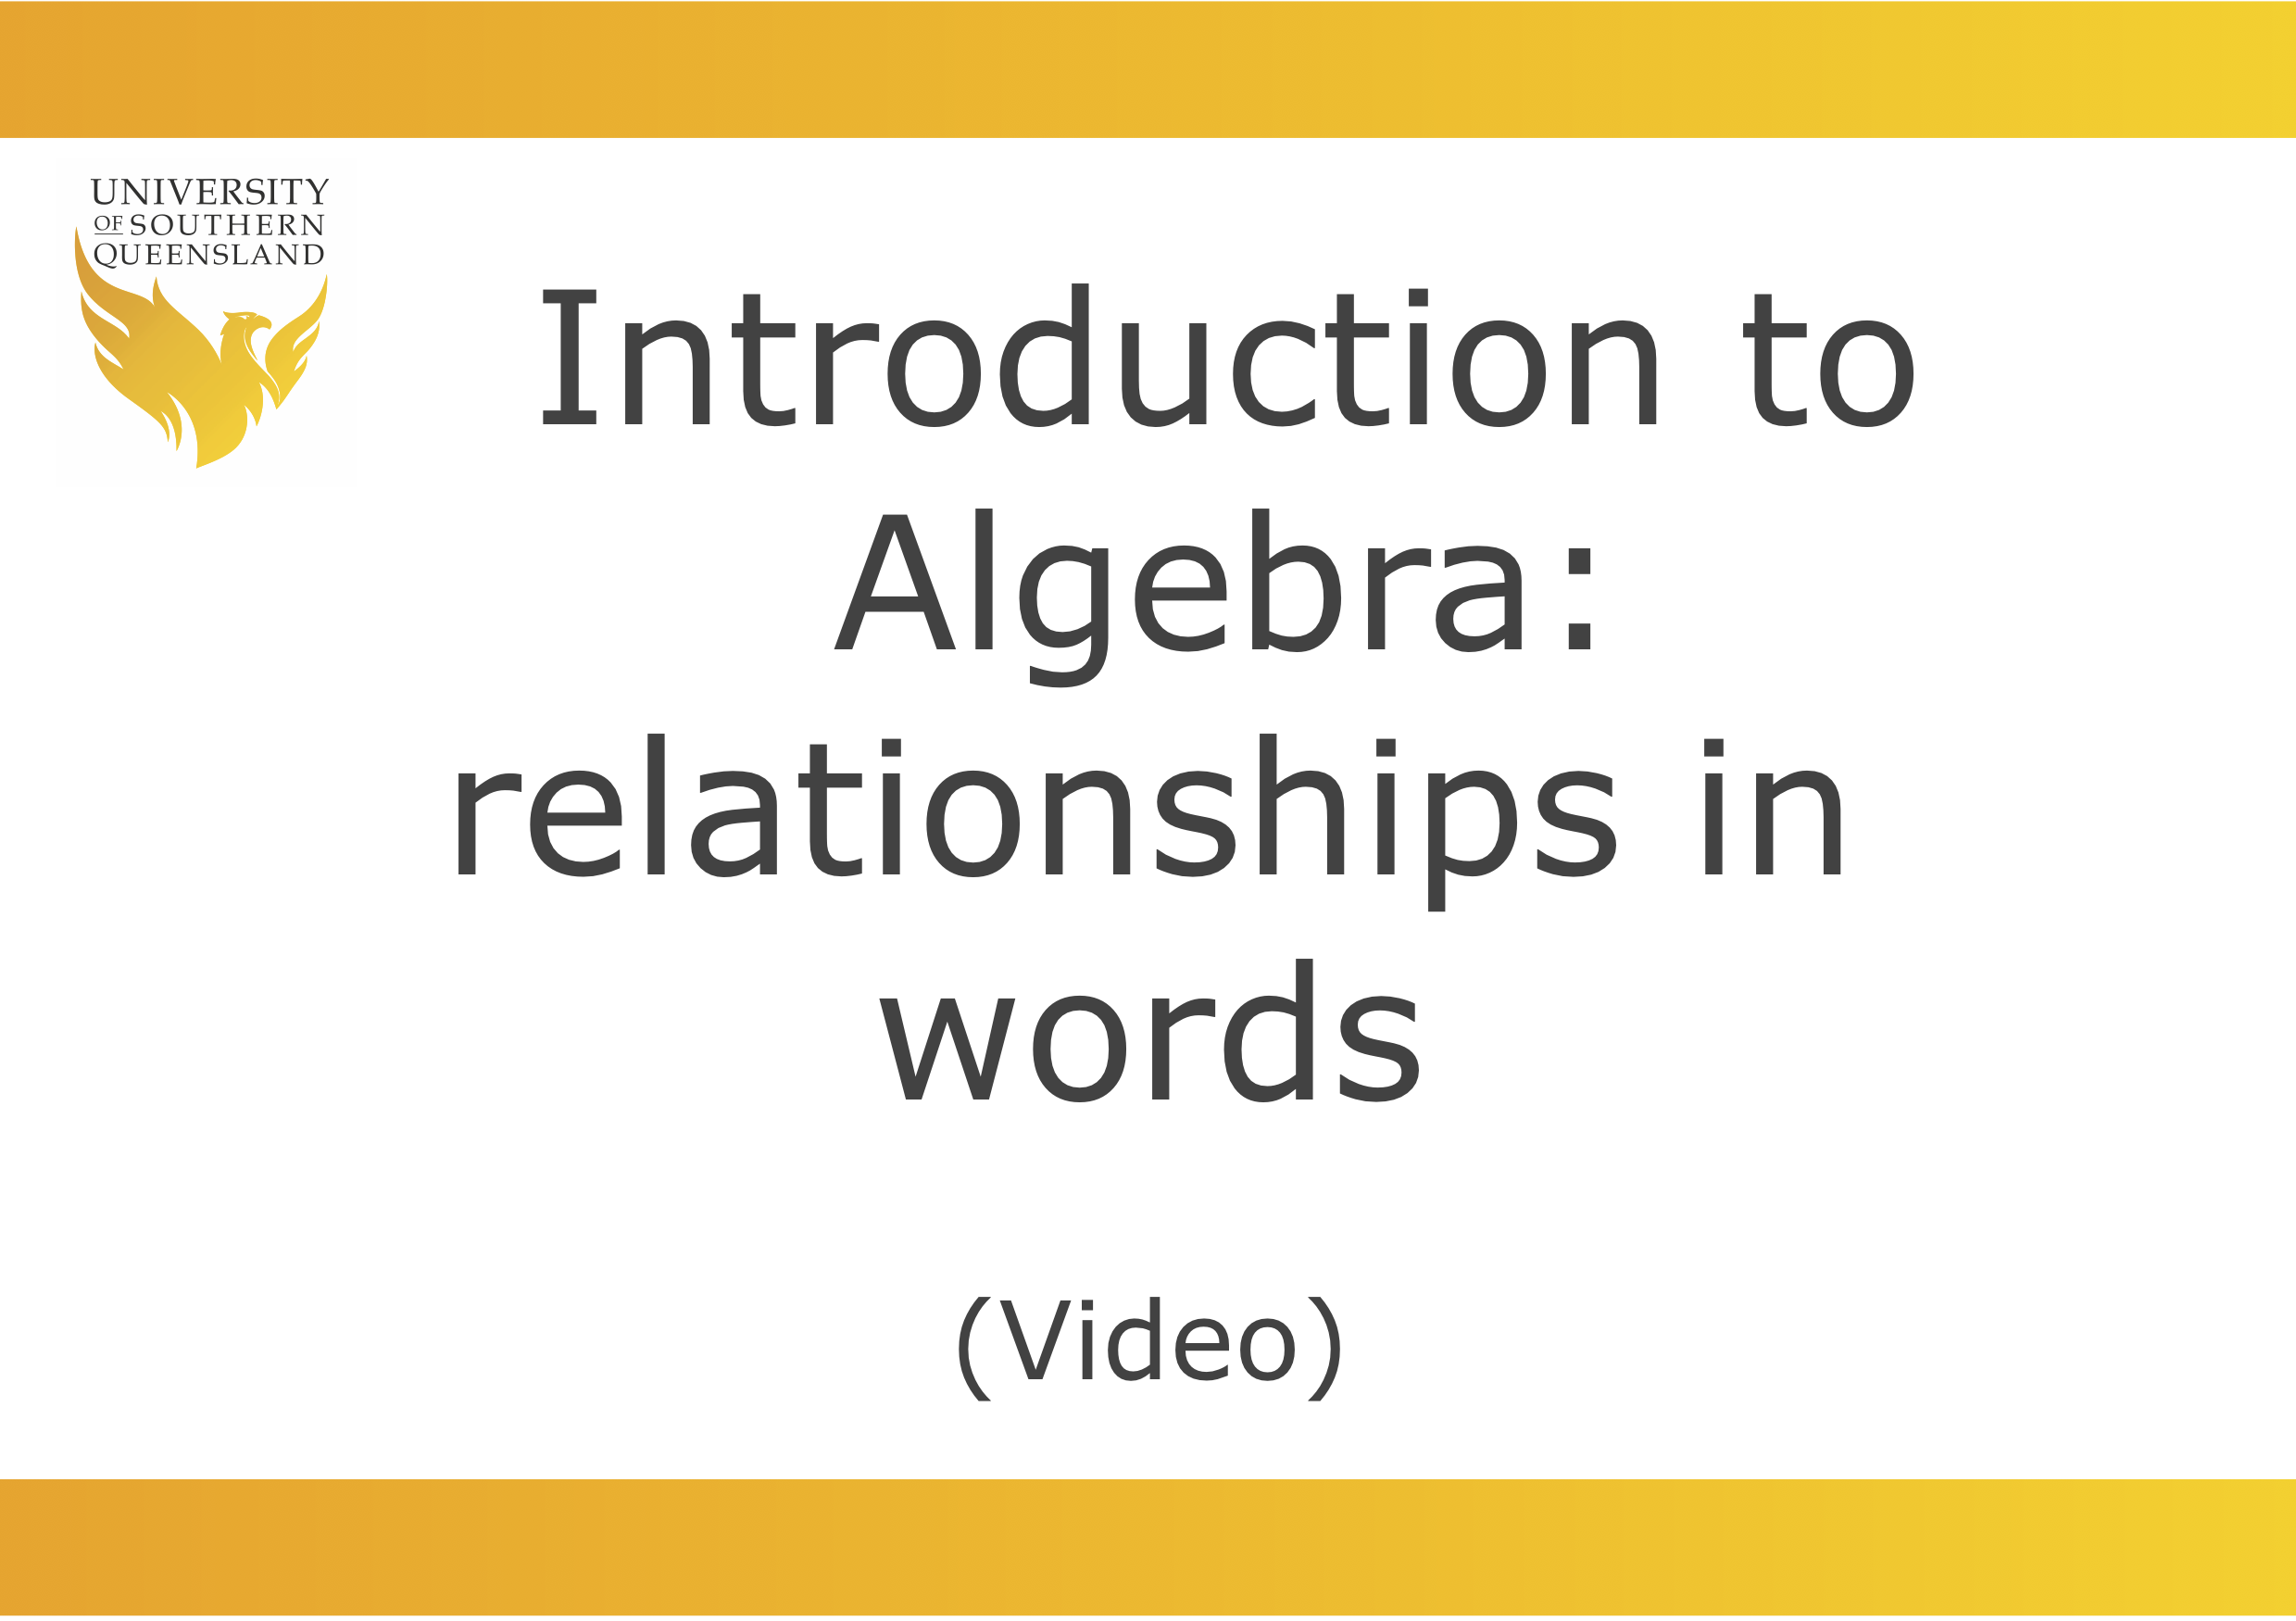 Introduction to Algebra: relationships in words video